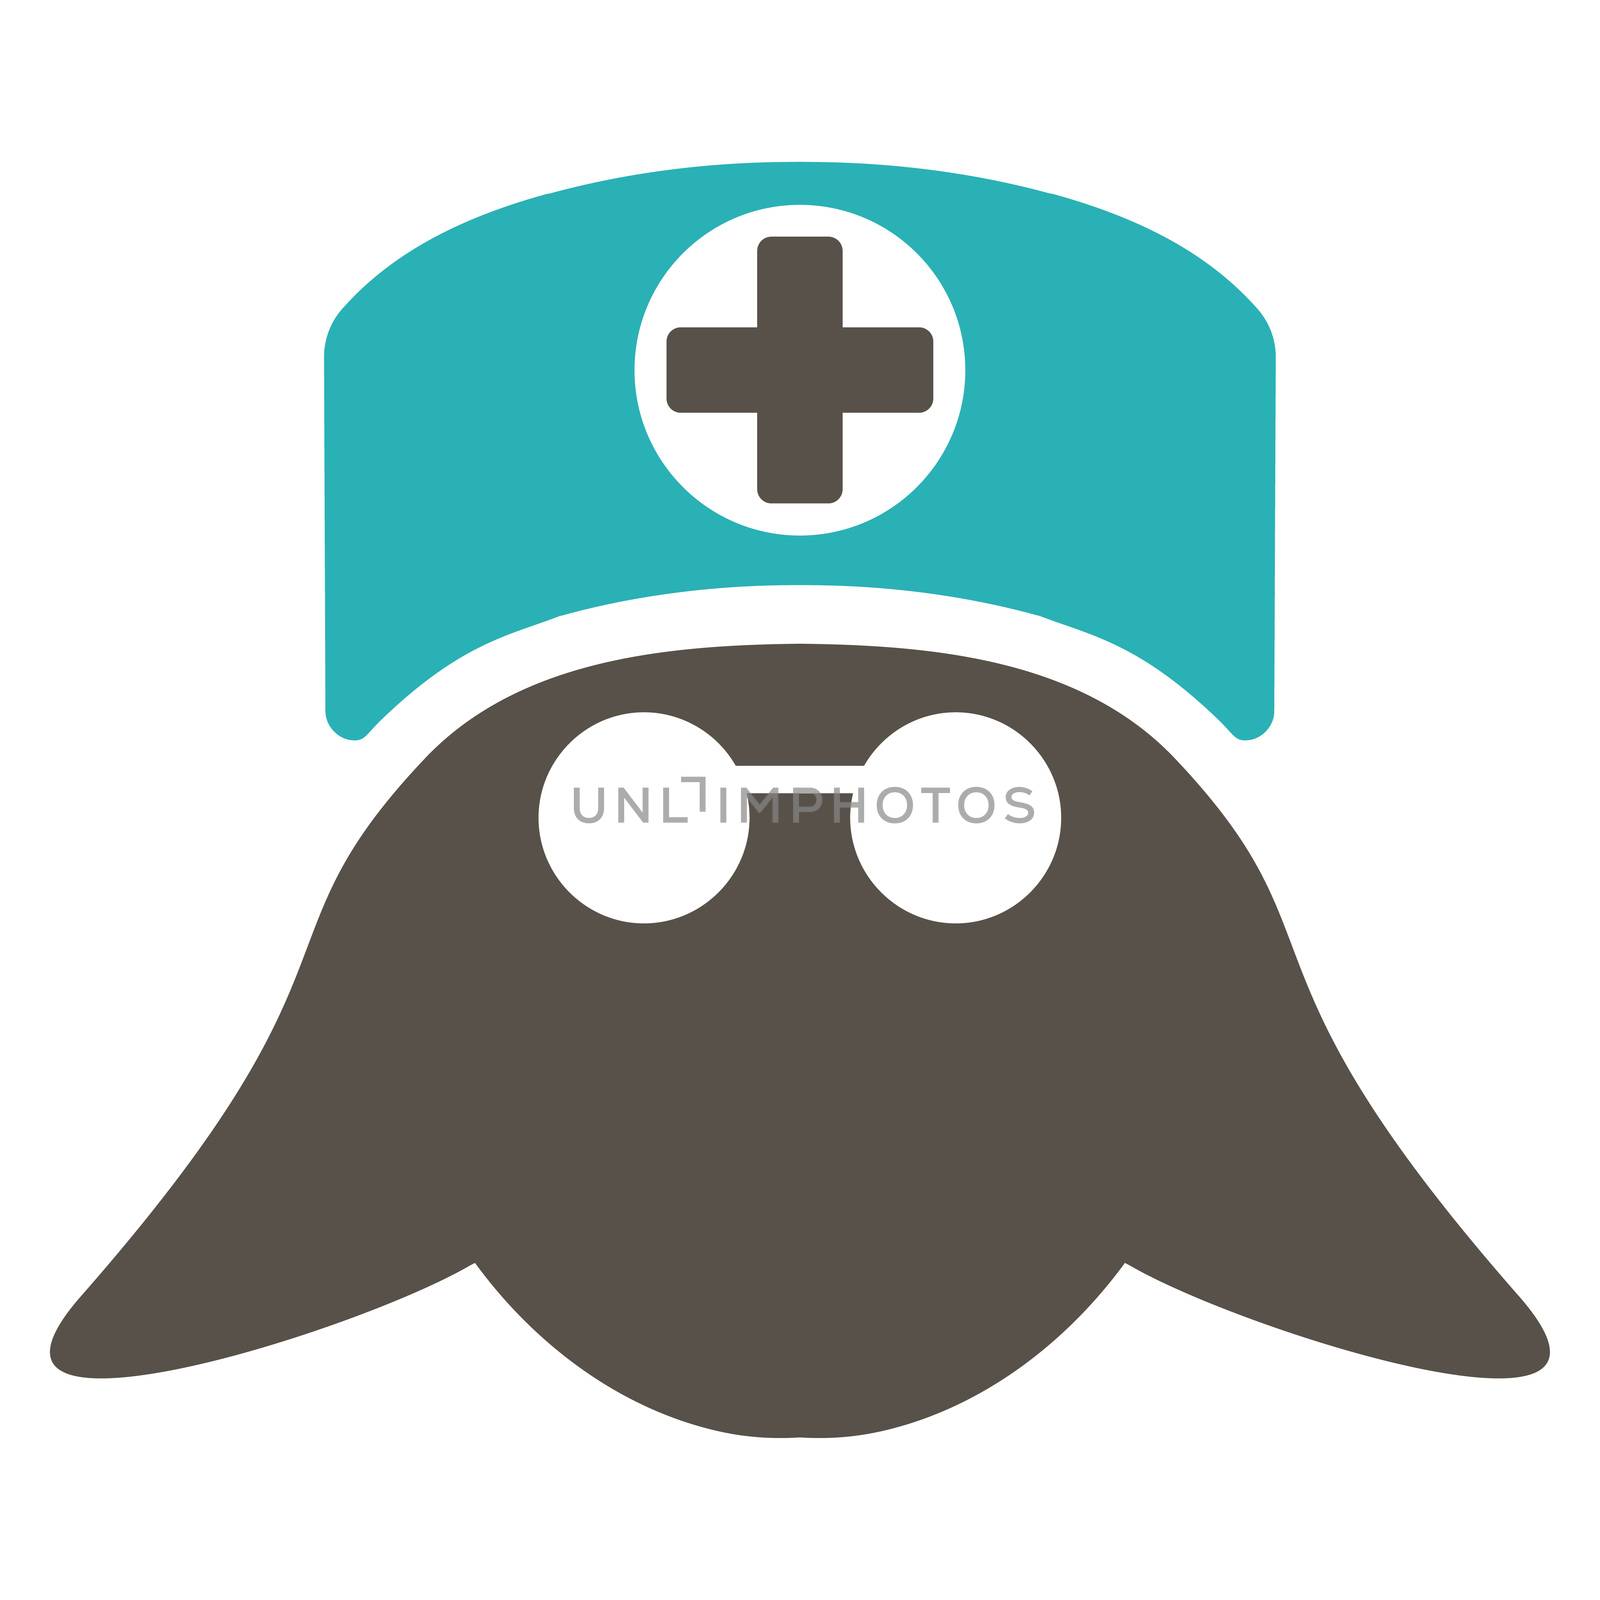 Nurse Head raster icon. Style is bicolor flat symbol, grey and cyan colors, rounded angles, white background.